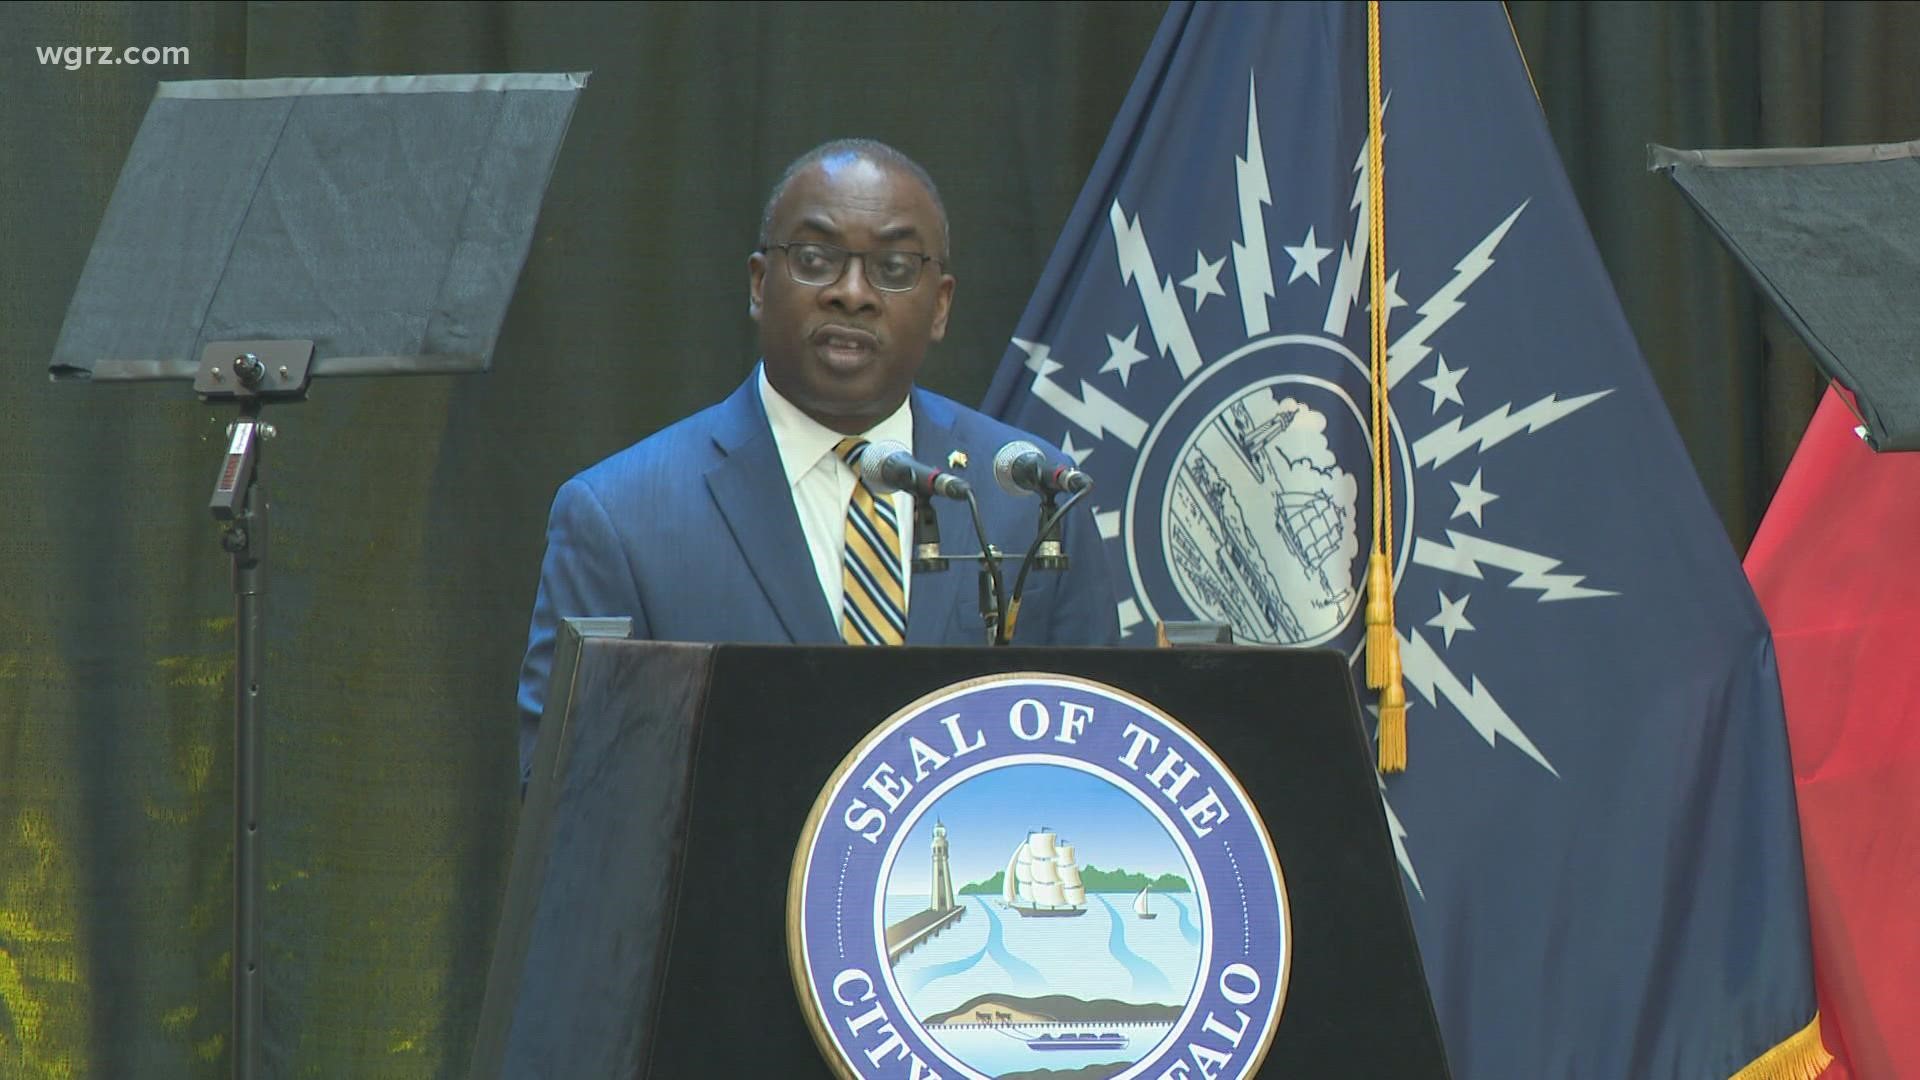 Buffalo Mayor Byron Brown's new $568 Million budget is now up for consideration by the city's Common Council and of course the scrutiny of city residents.